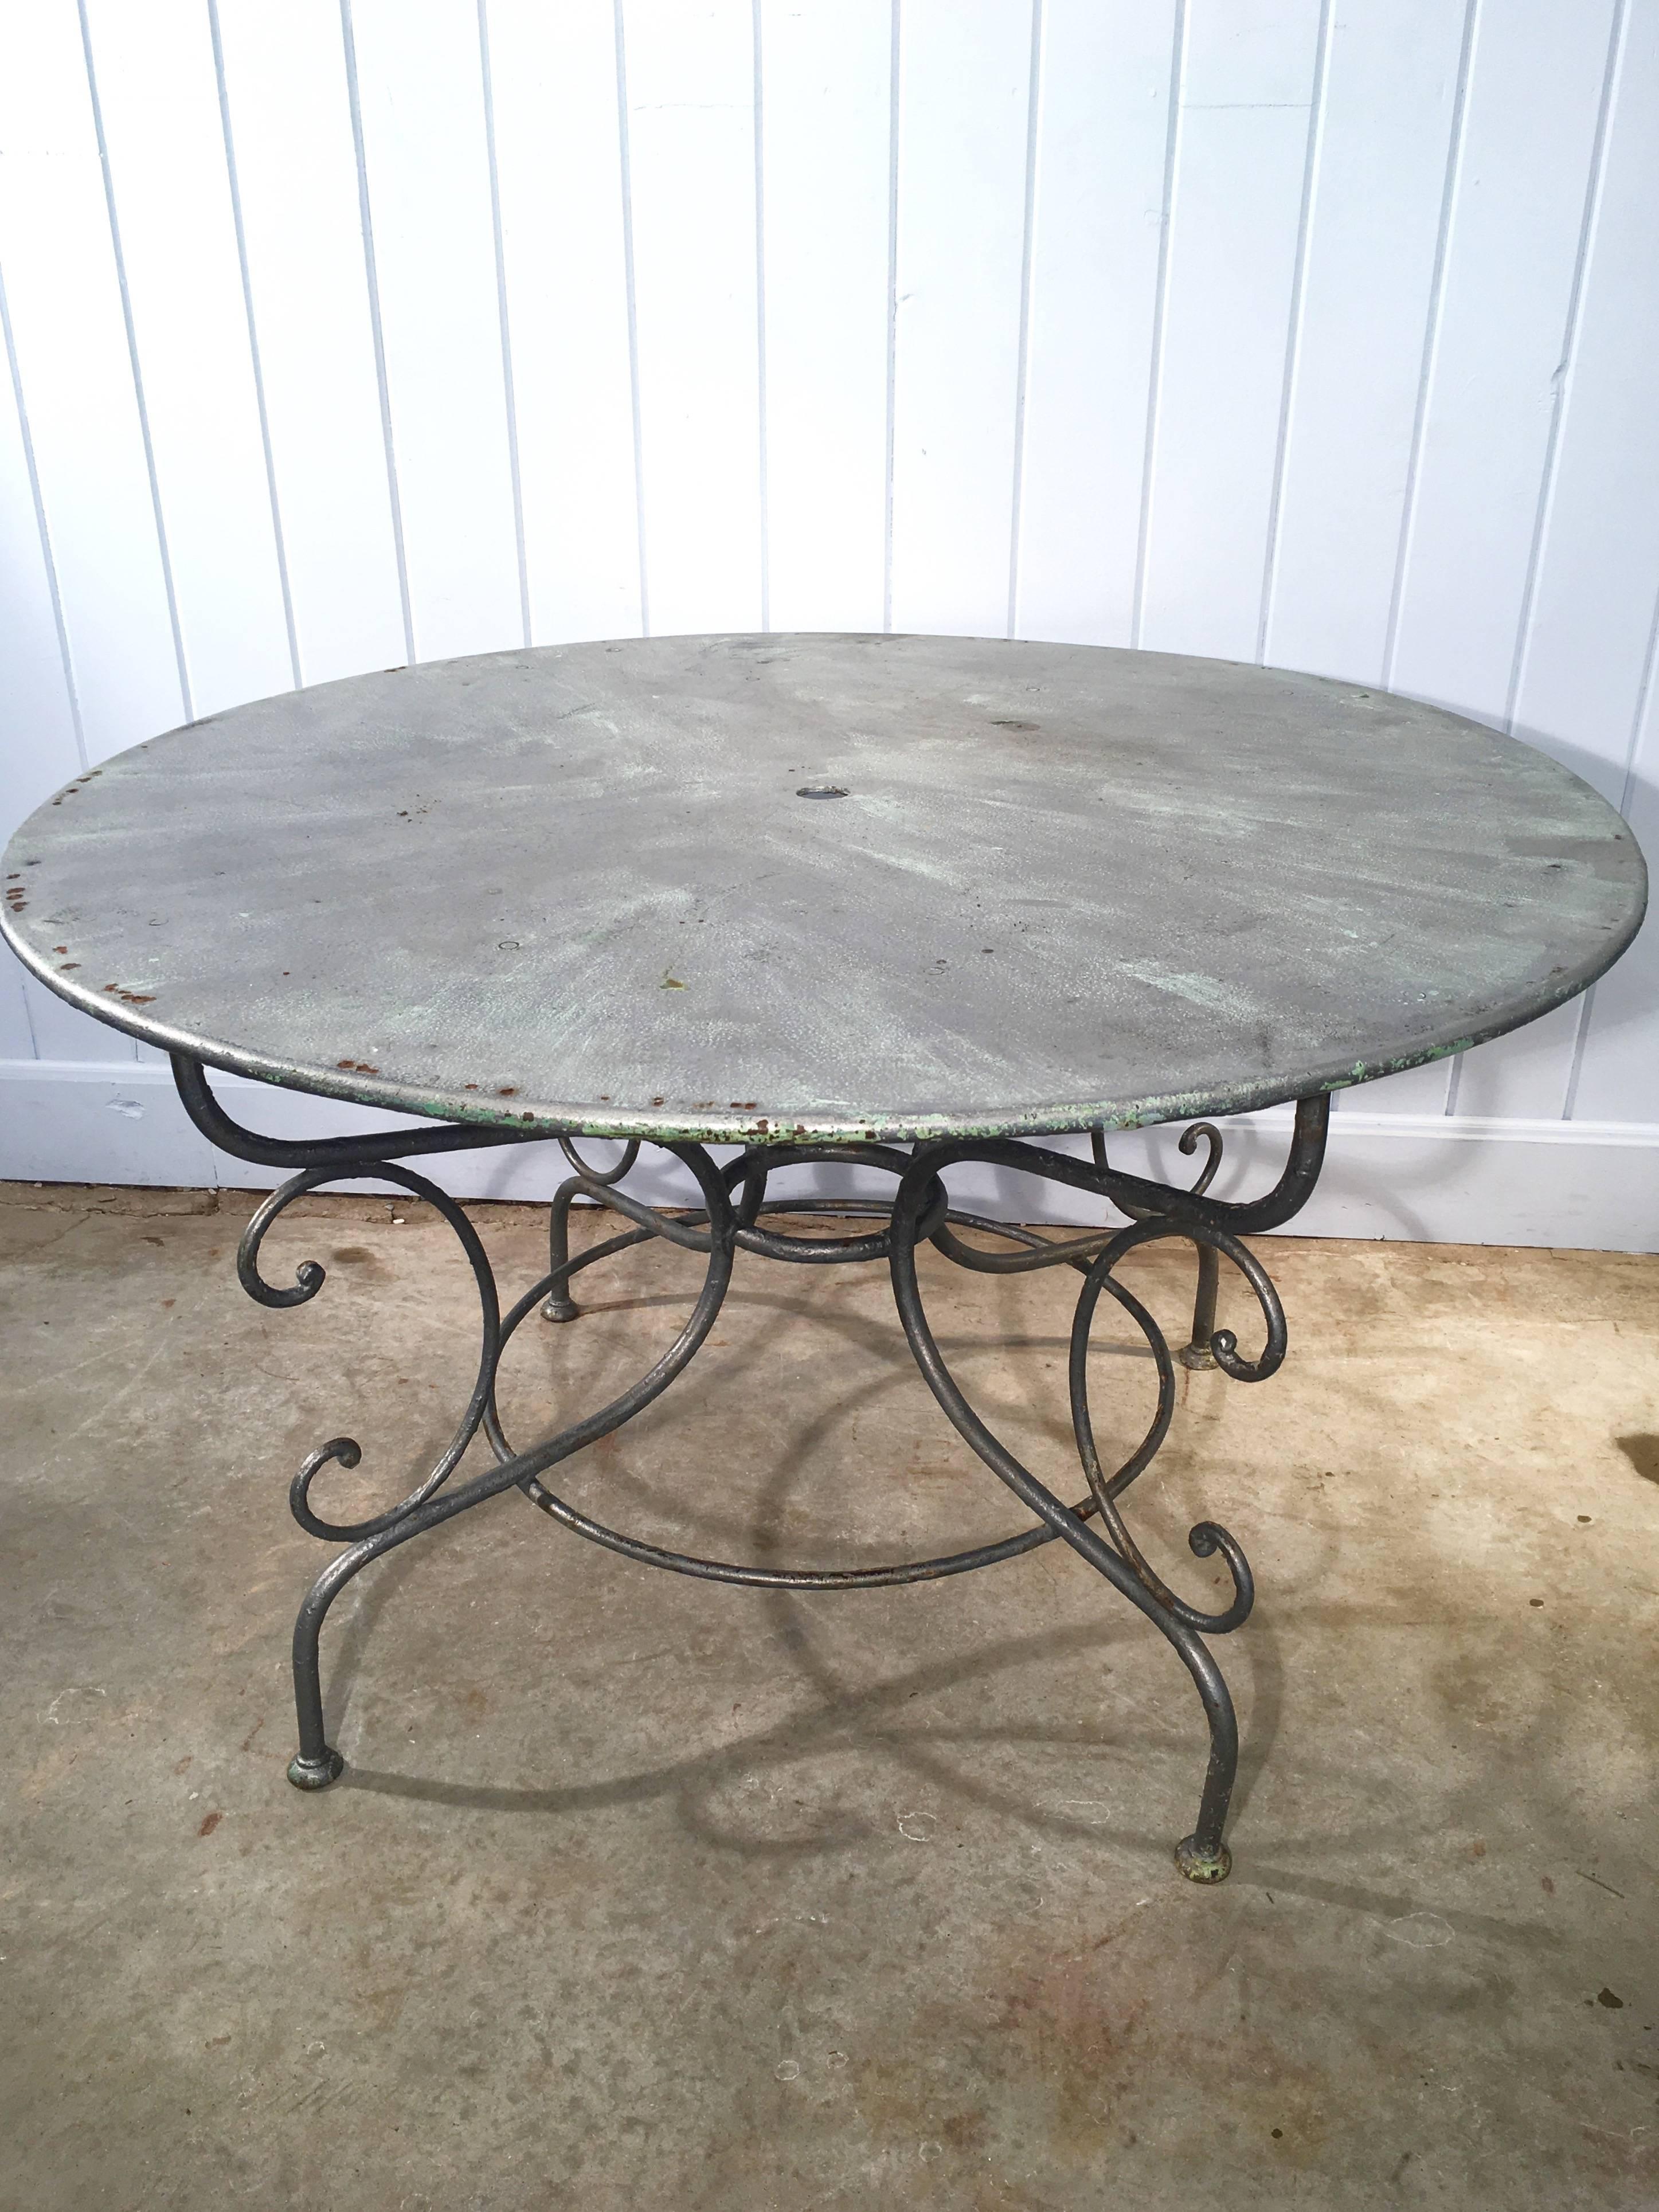 We love scrolled-base French garden tables and this one does not disappoint. In a pale, somewhat muted and translucent silvery paint, it has undertones of green and can be left as is or stripped and powder-coated so you never have to worry about